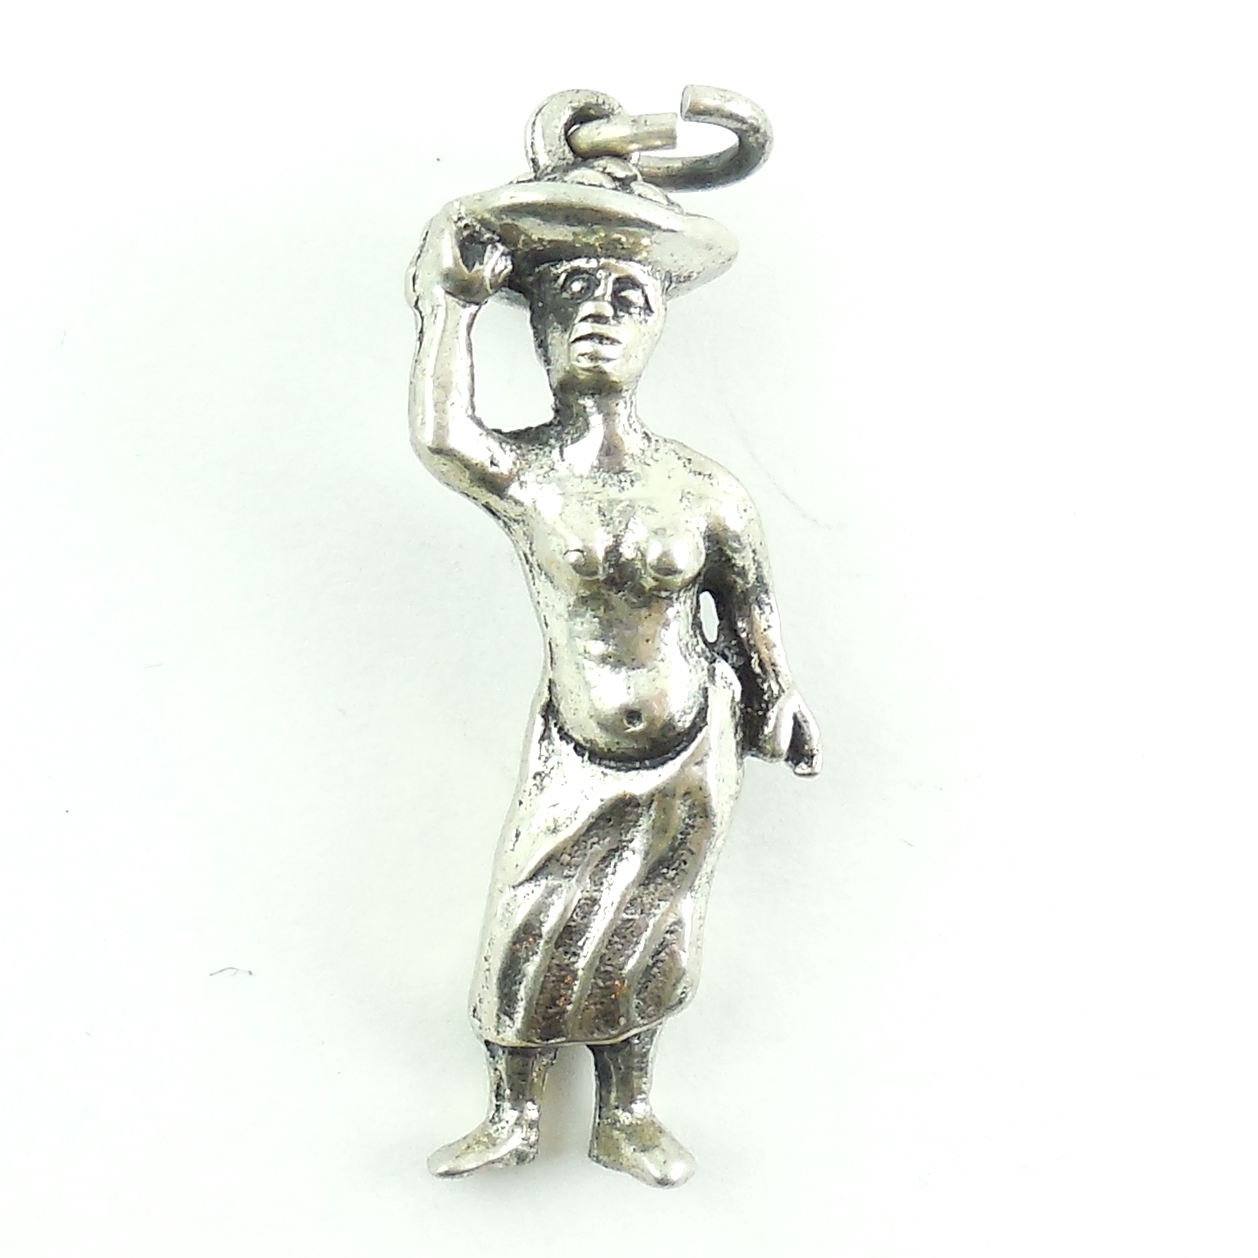 Late Art Deco 1942 African Villager Transporting Fruit Charm With Hallmarks Very Rare